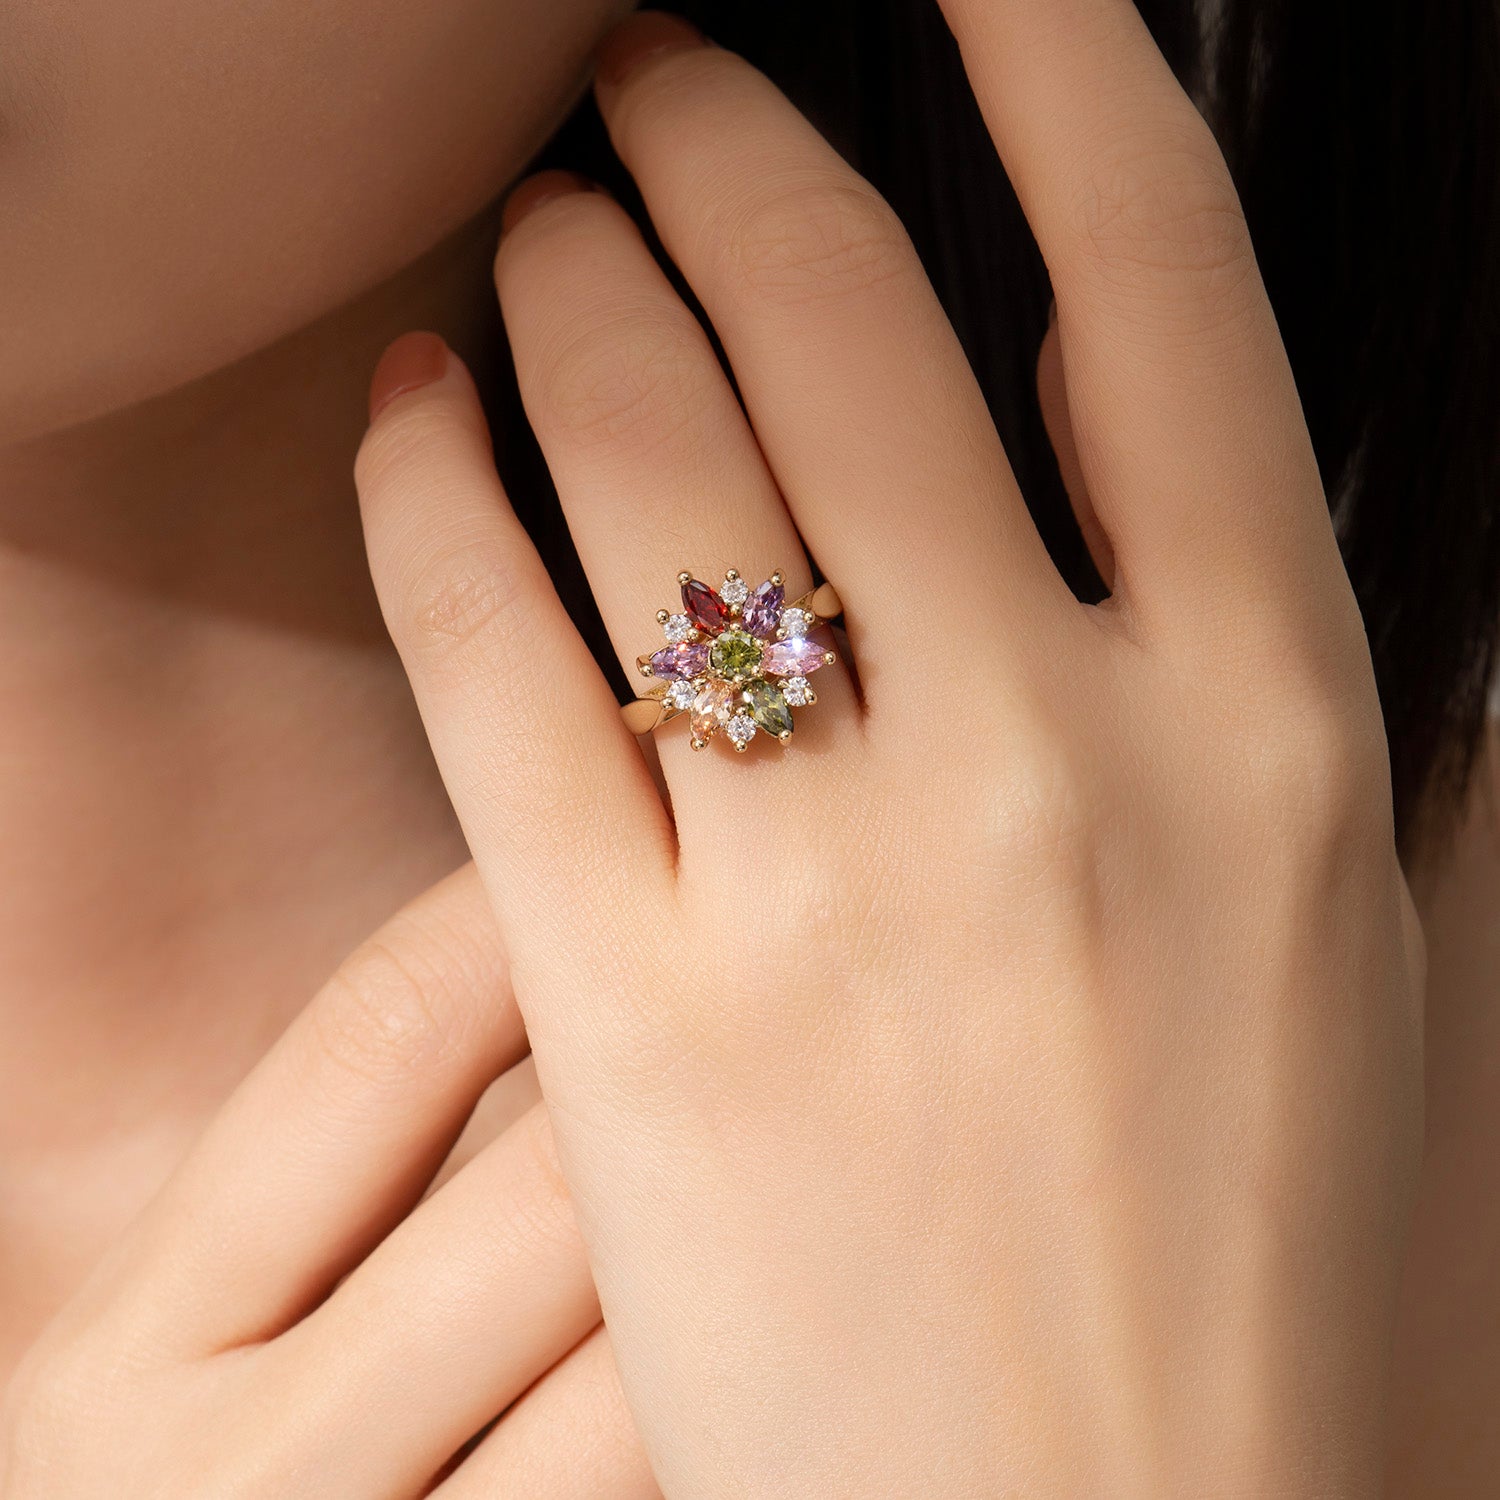 Dissoo® Multicolor Floral Cluster Cocktail Ring in 14K Gold Vermeil